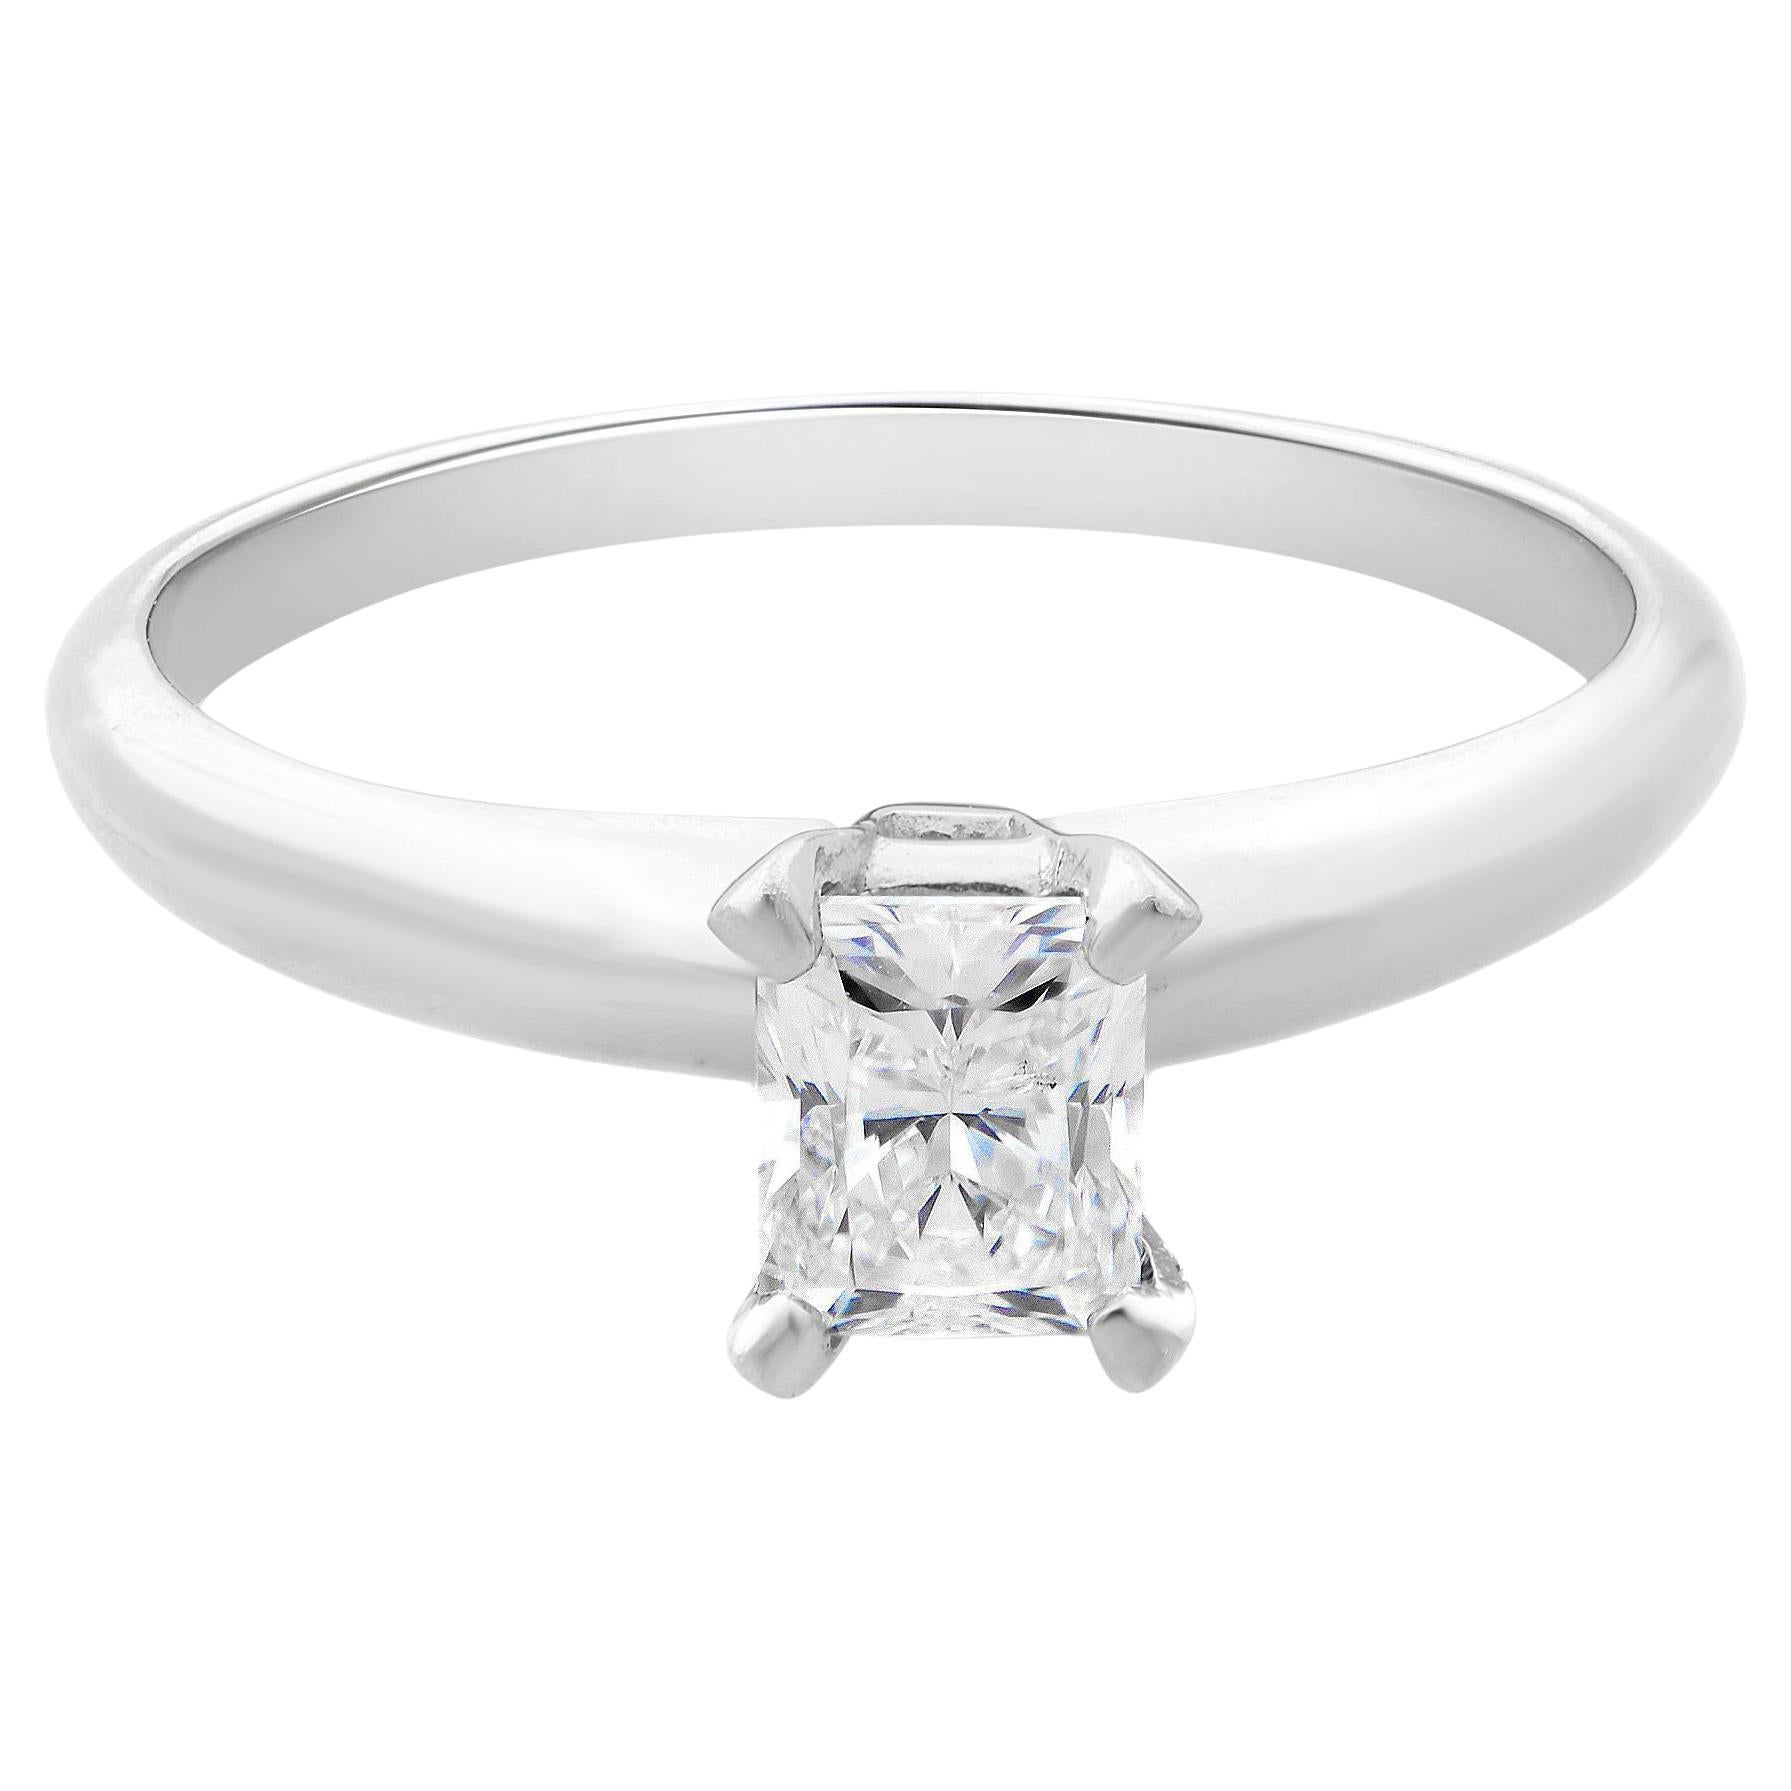 Emerald Cut Diamond Solitaire Engagement Ring 14K White Gold 0.30cttw For Sale